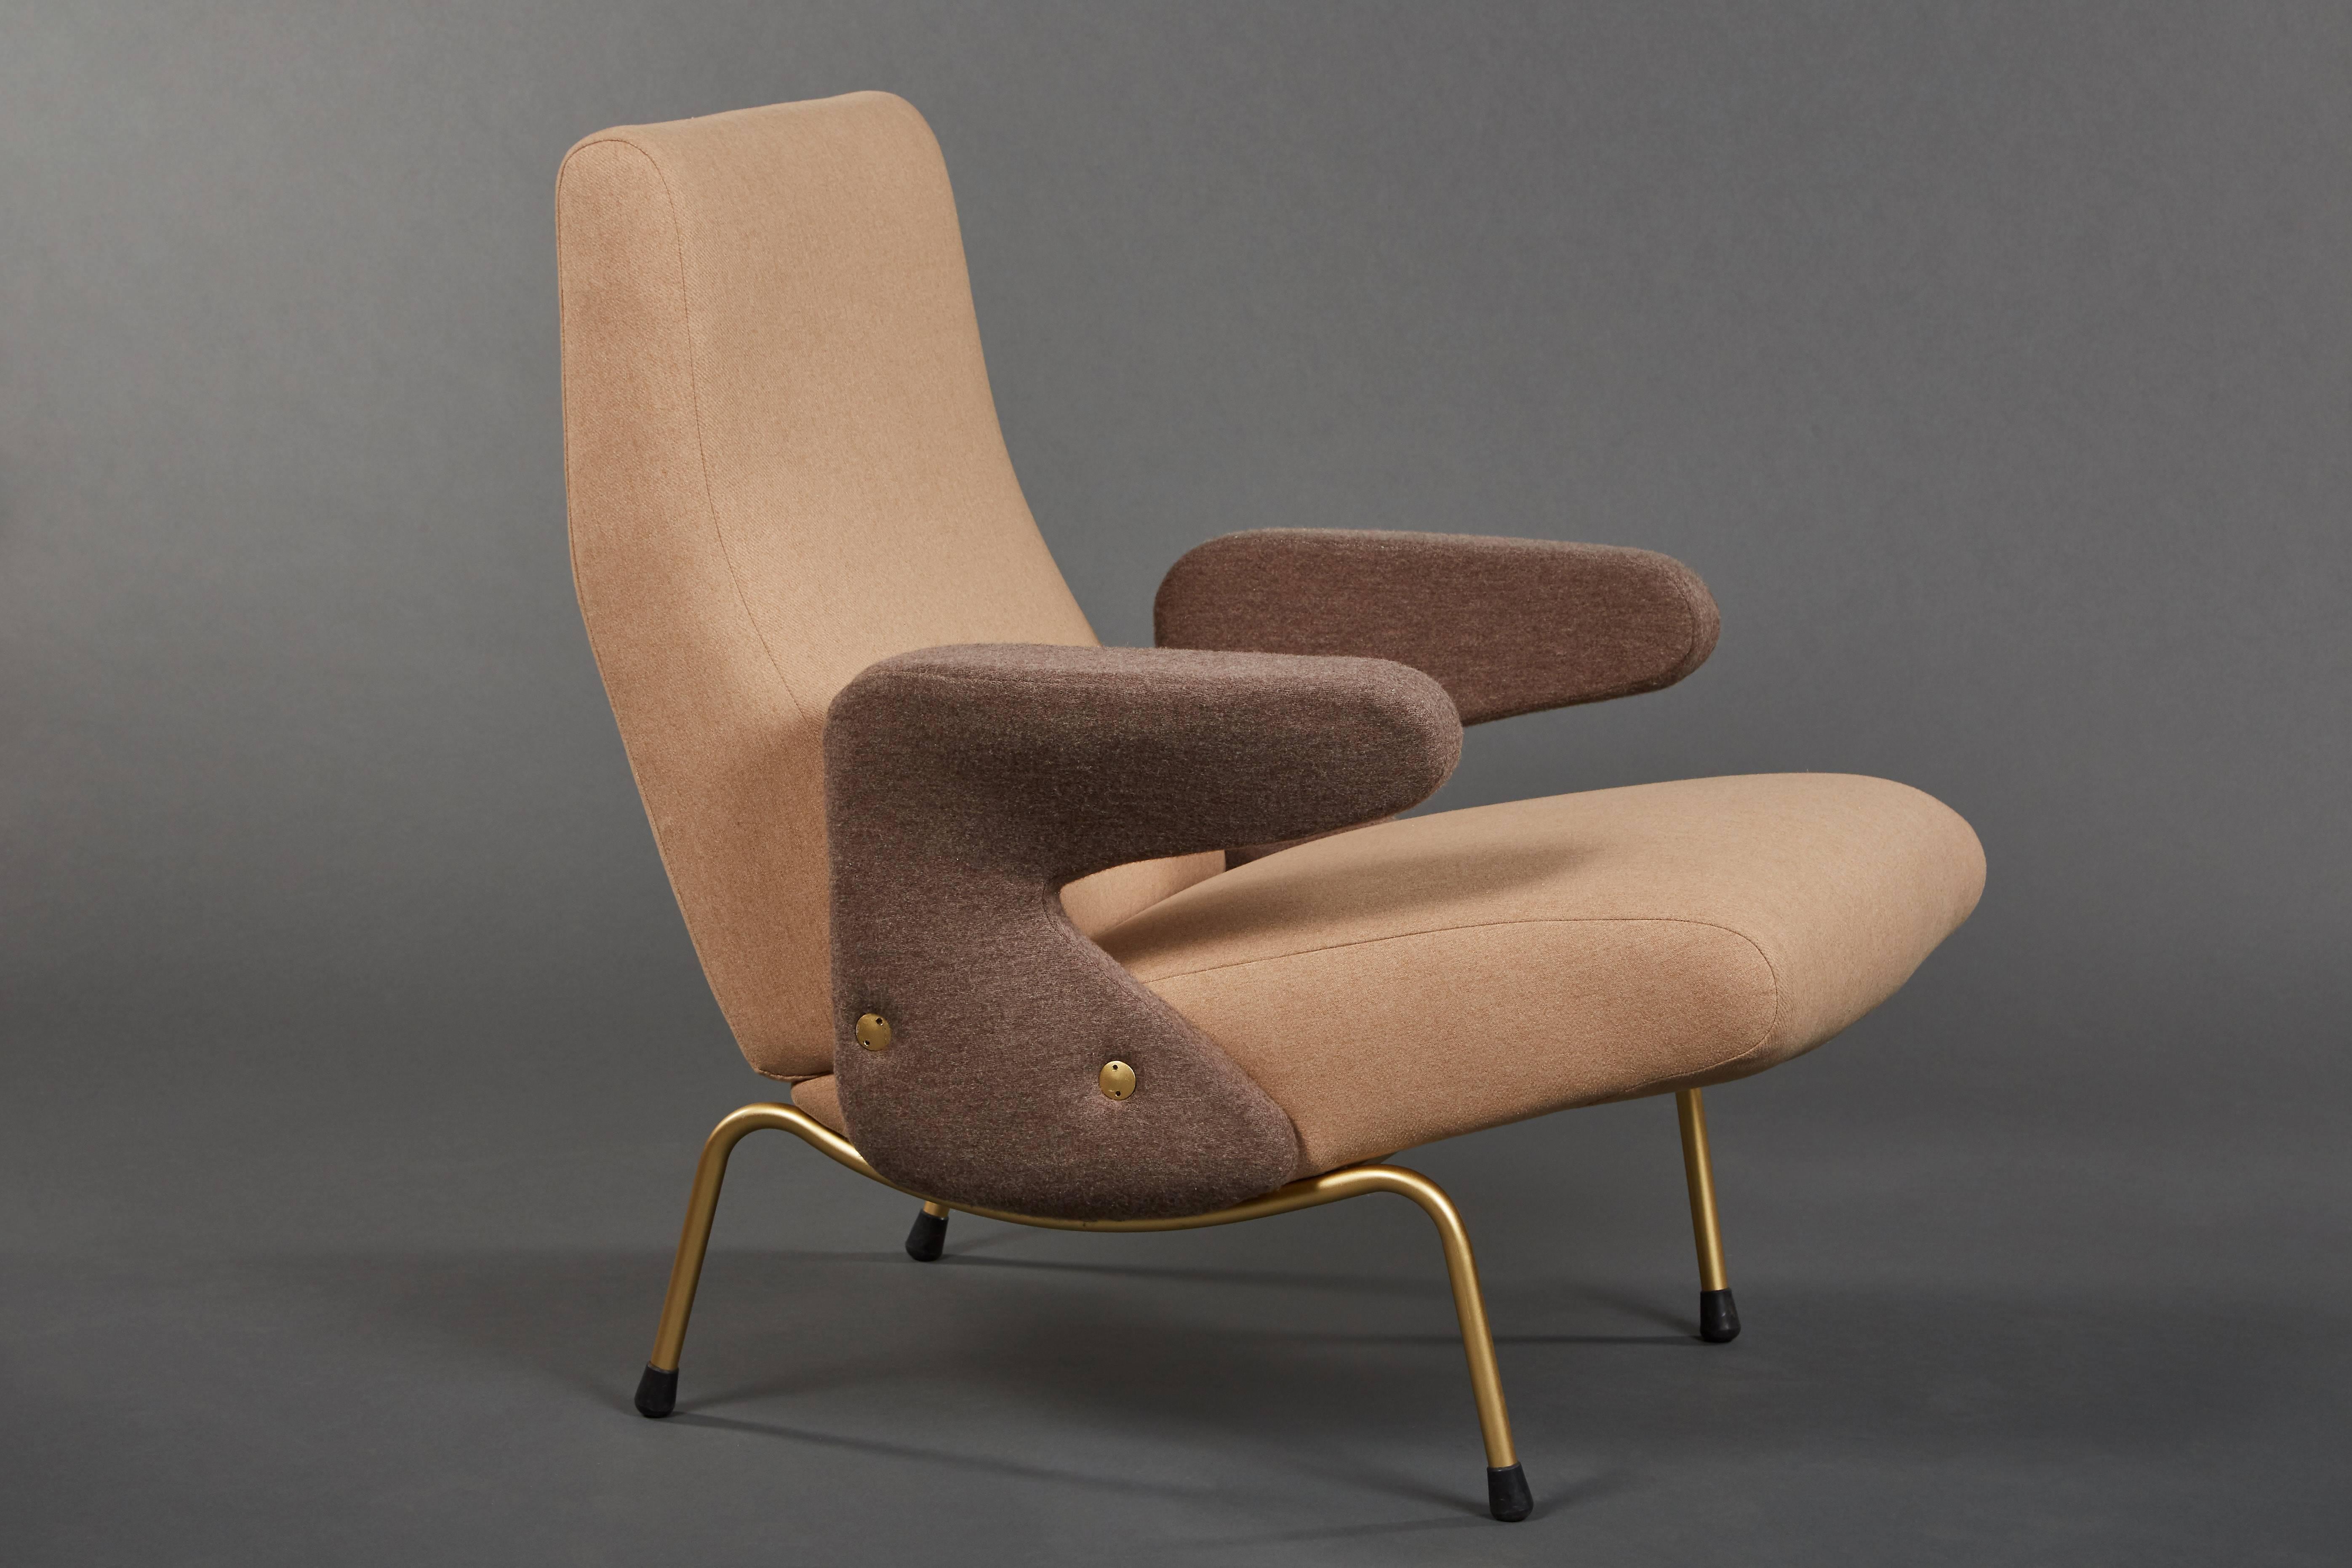 A pair of “Delfino” (aka Dolphin) armchairs by Erberto Carboni for Arflex, designed in 1954. Vintage pair newly upholstered in a subtle soft, heathered twill with contrasting cashmere arms.

Literature: Repertorio del Design Italiano, Volume 1, p.